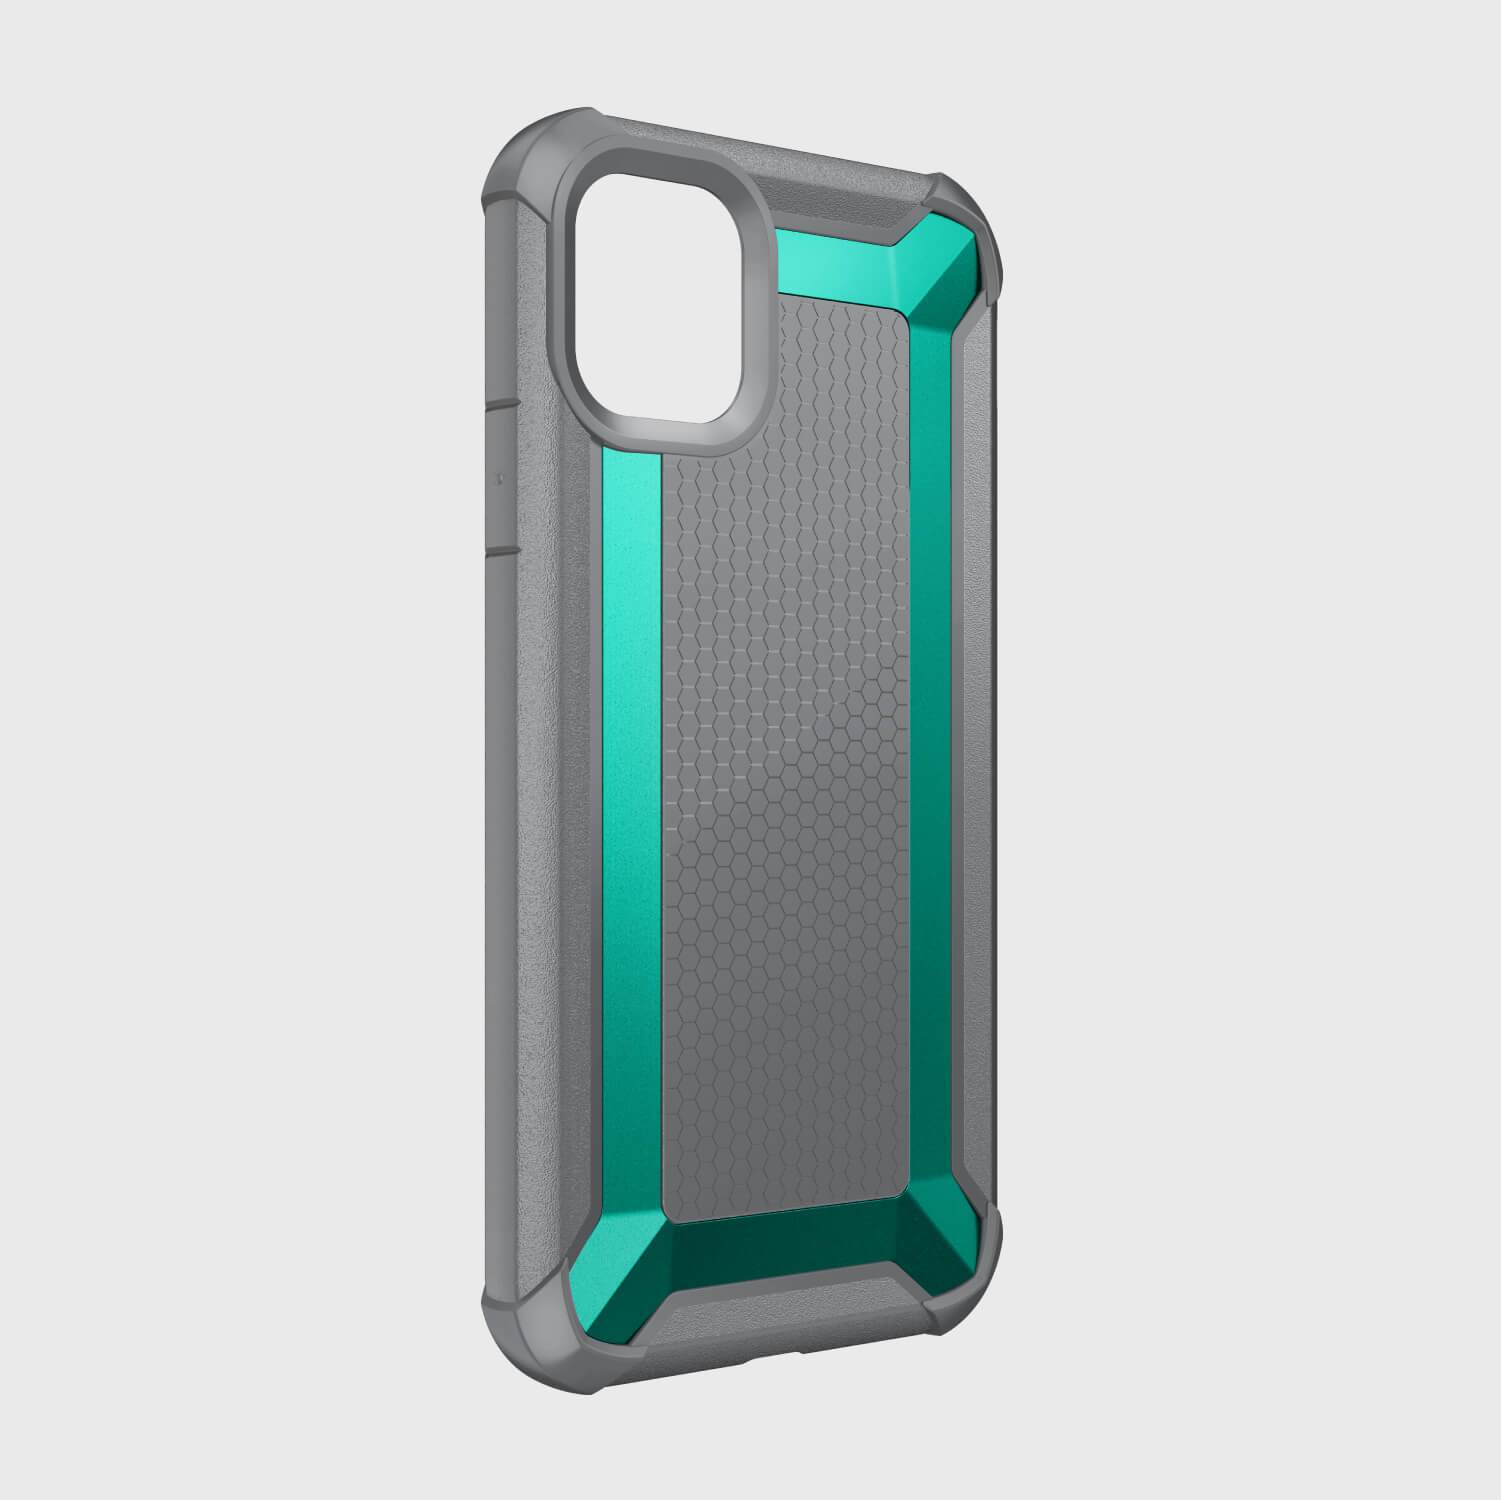 The grey and teal Raptic Tactical protective iPhone 11 Pro Max Case - TACTICAL showcases a shock-absorbing rubber exterior, meeting Military Standard MIL-STD-810G.